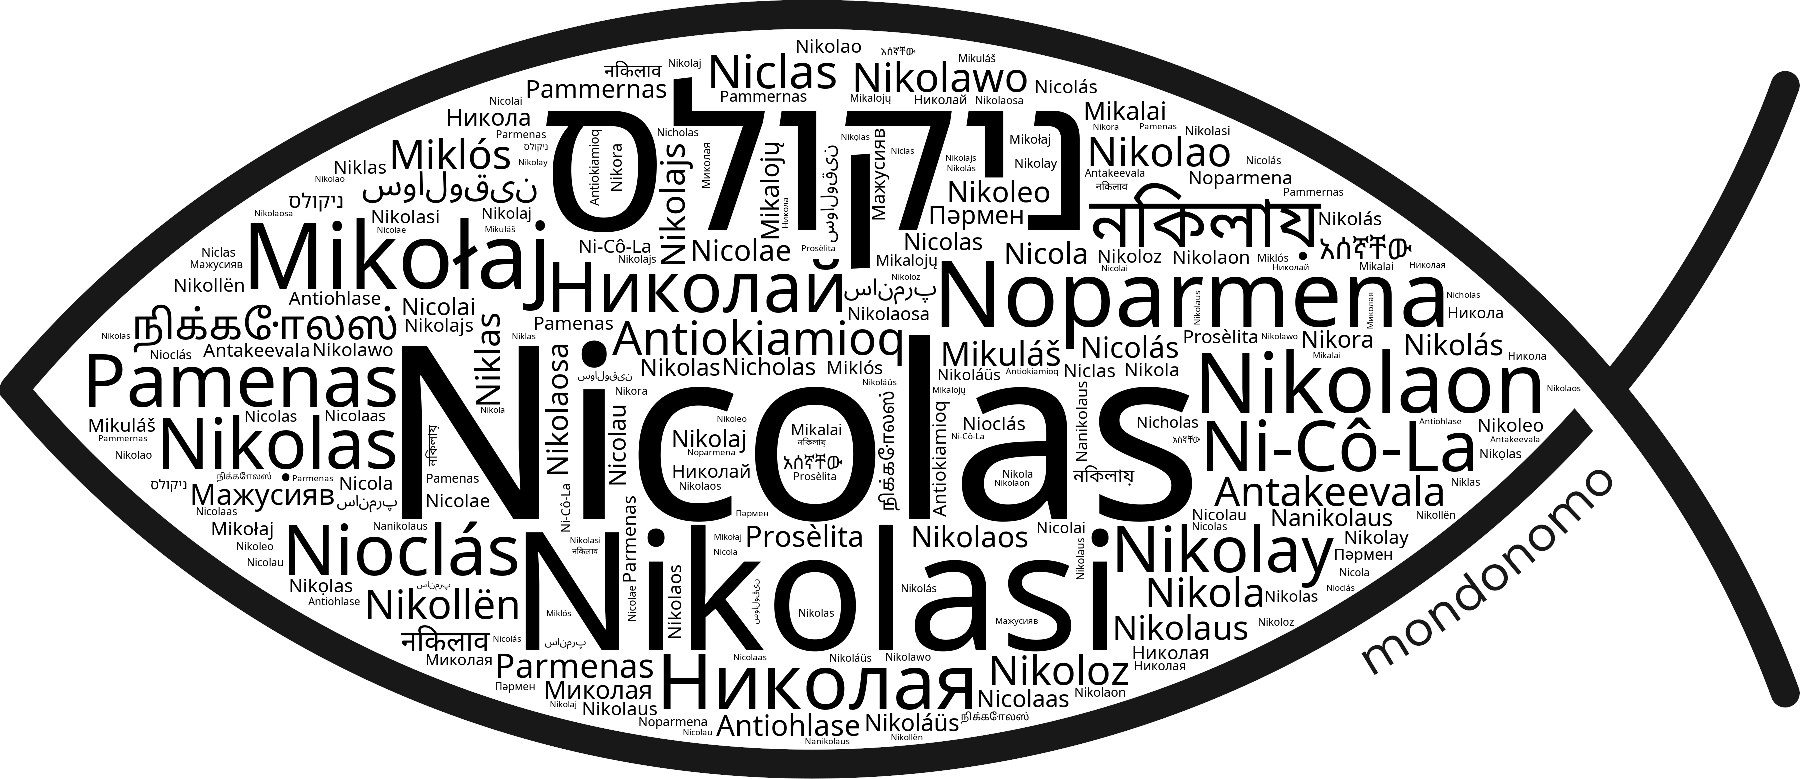 Name Nicolas in the world's Bibles